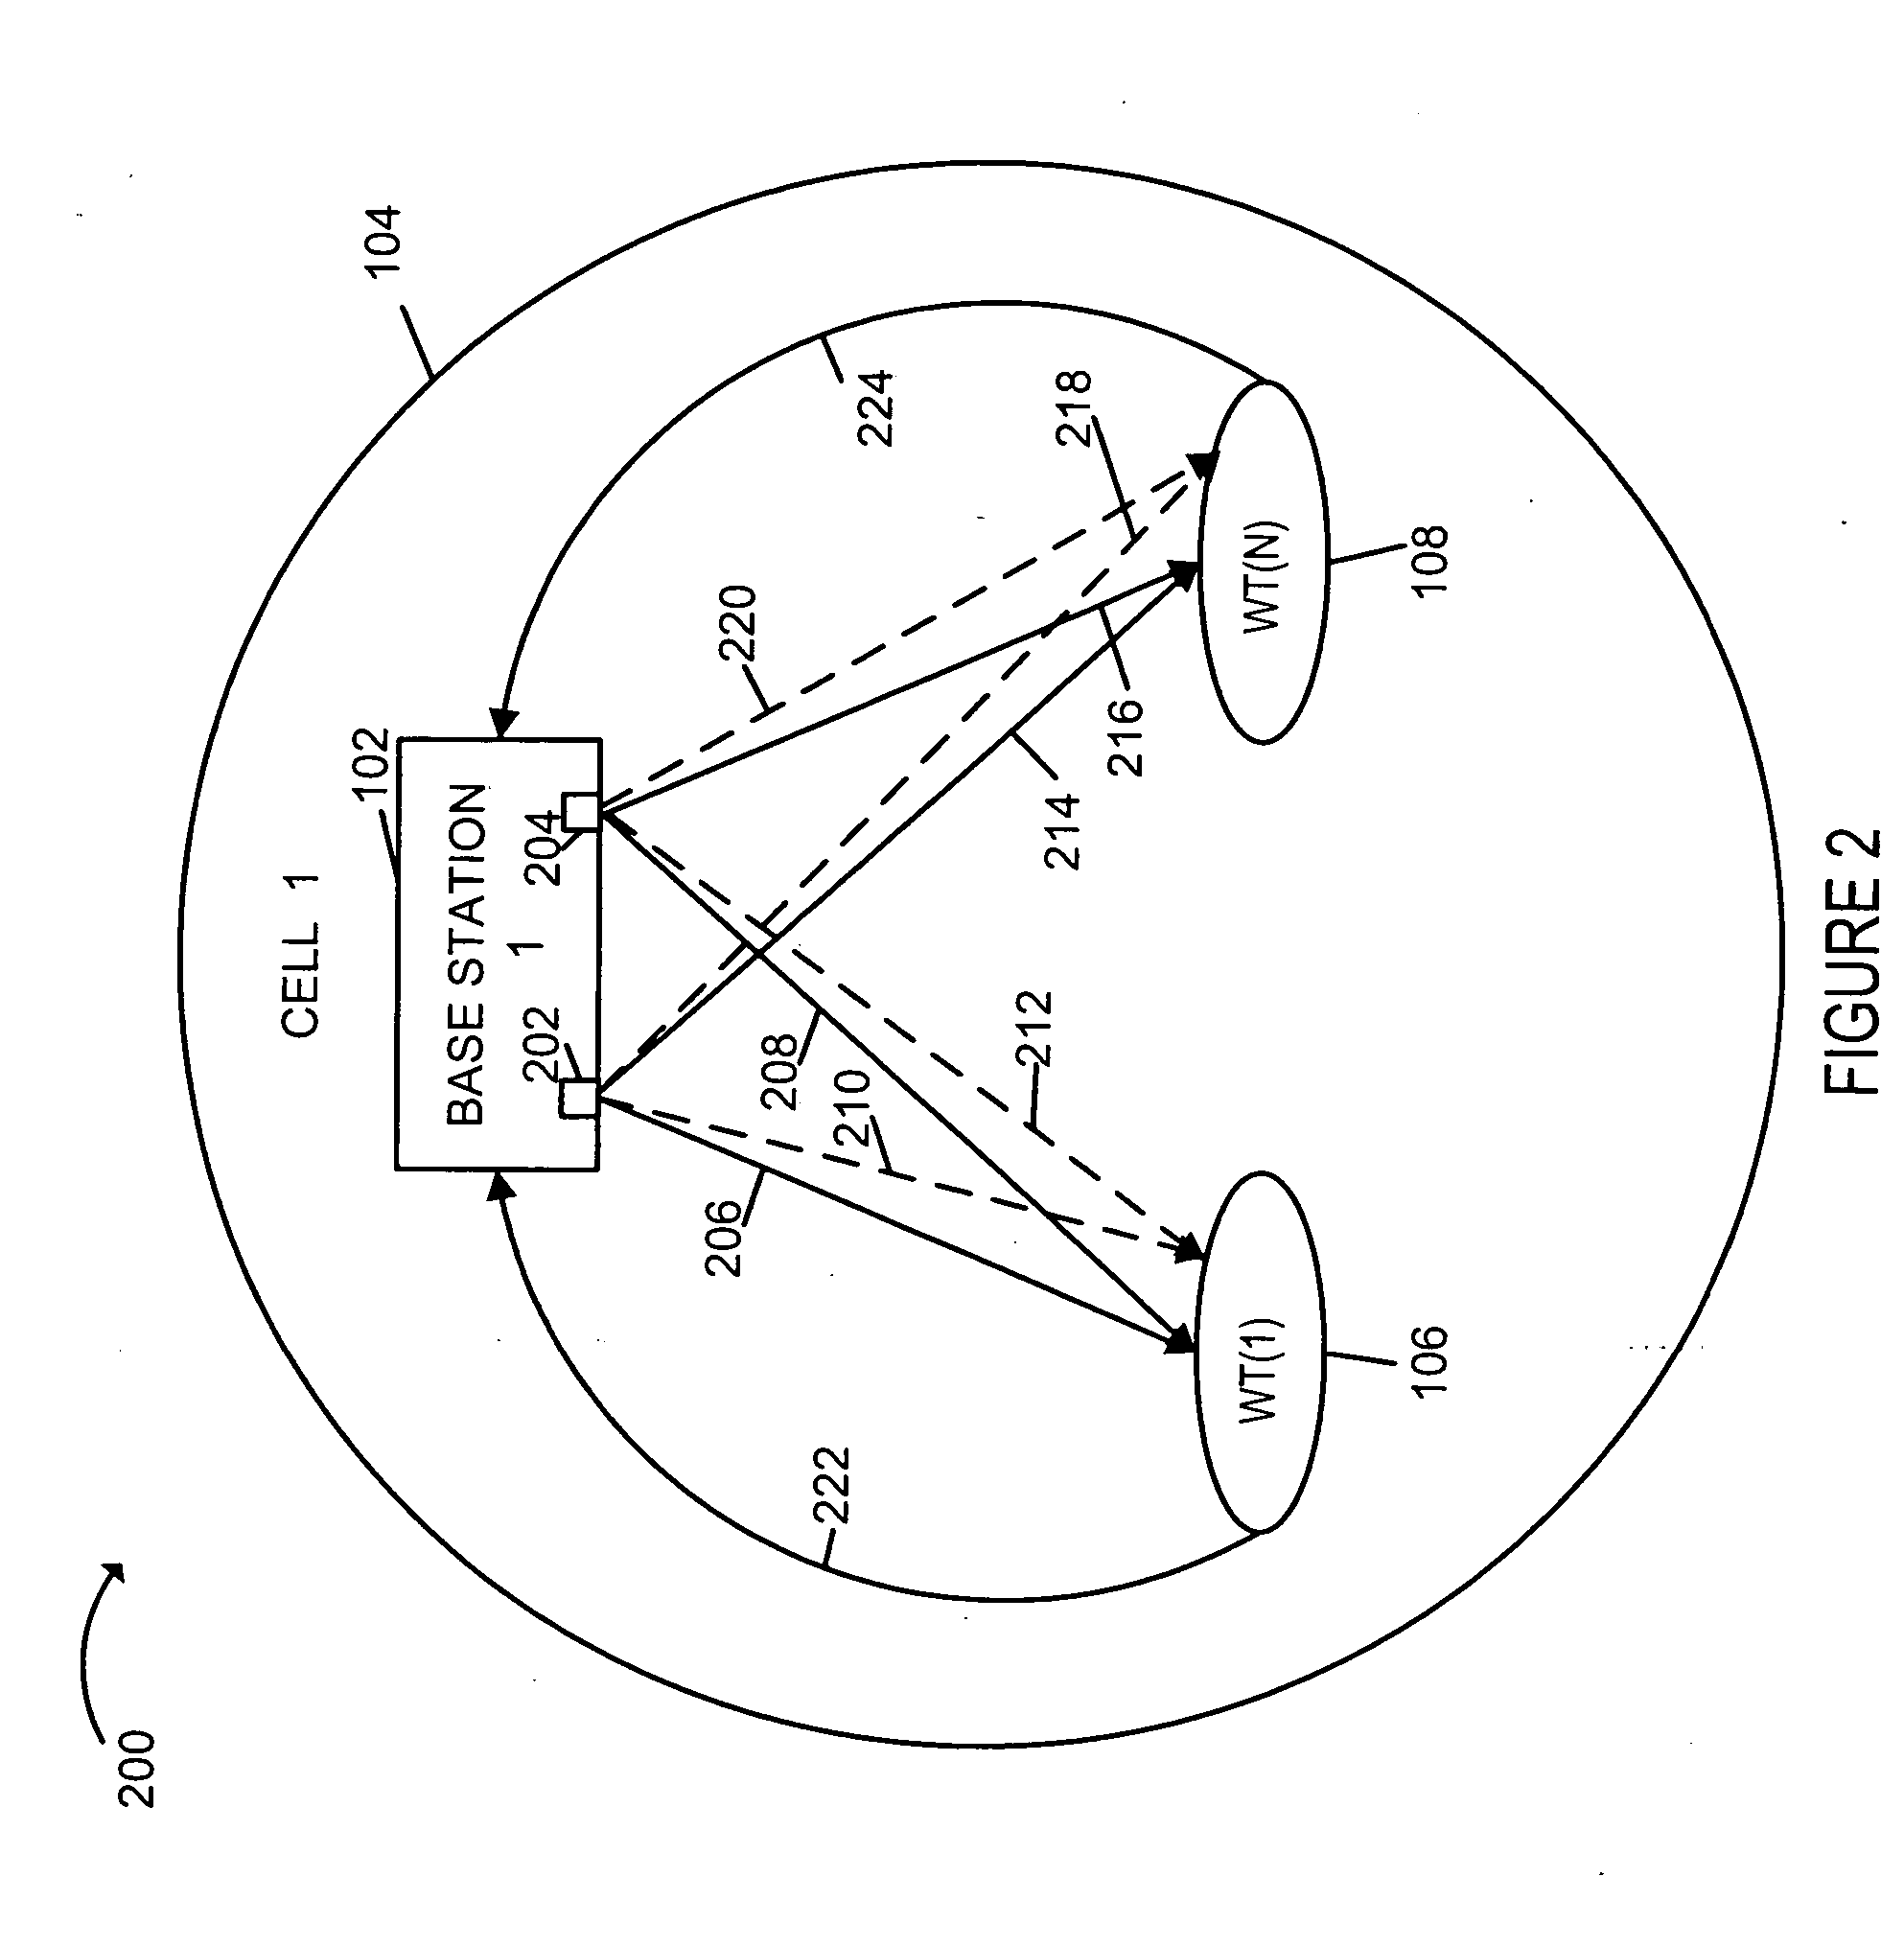 Methods and apparatus of providing transmit diversity in a multiple access wireless communication system